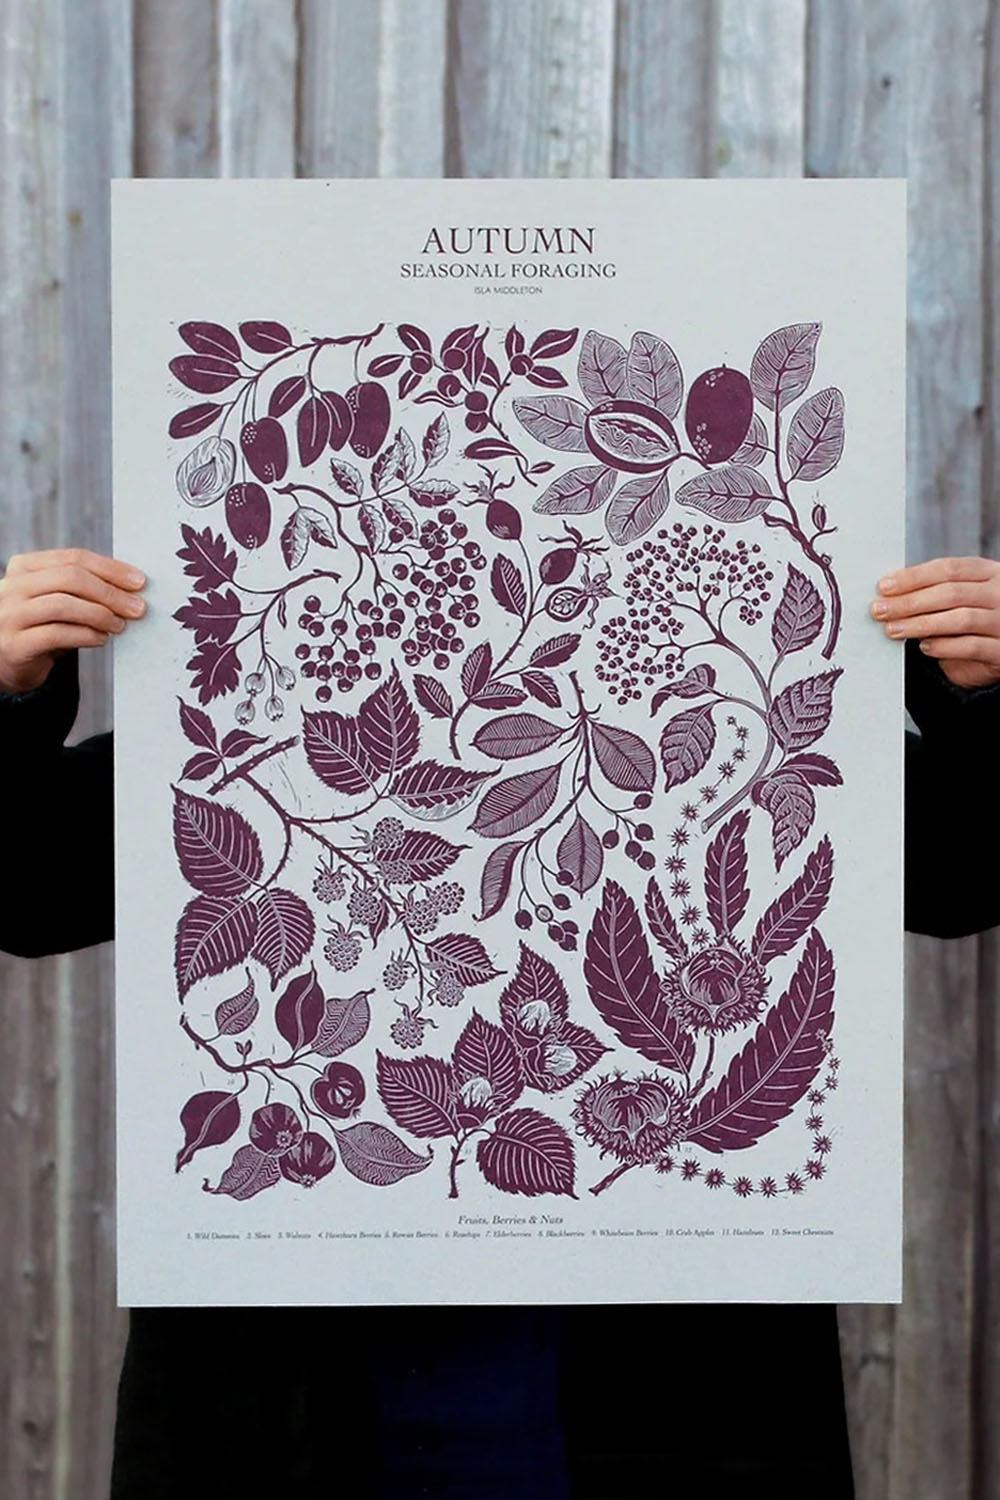 Autumn Foraging Poster By Isla Middleton